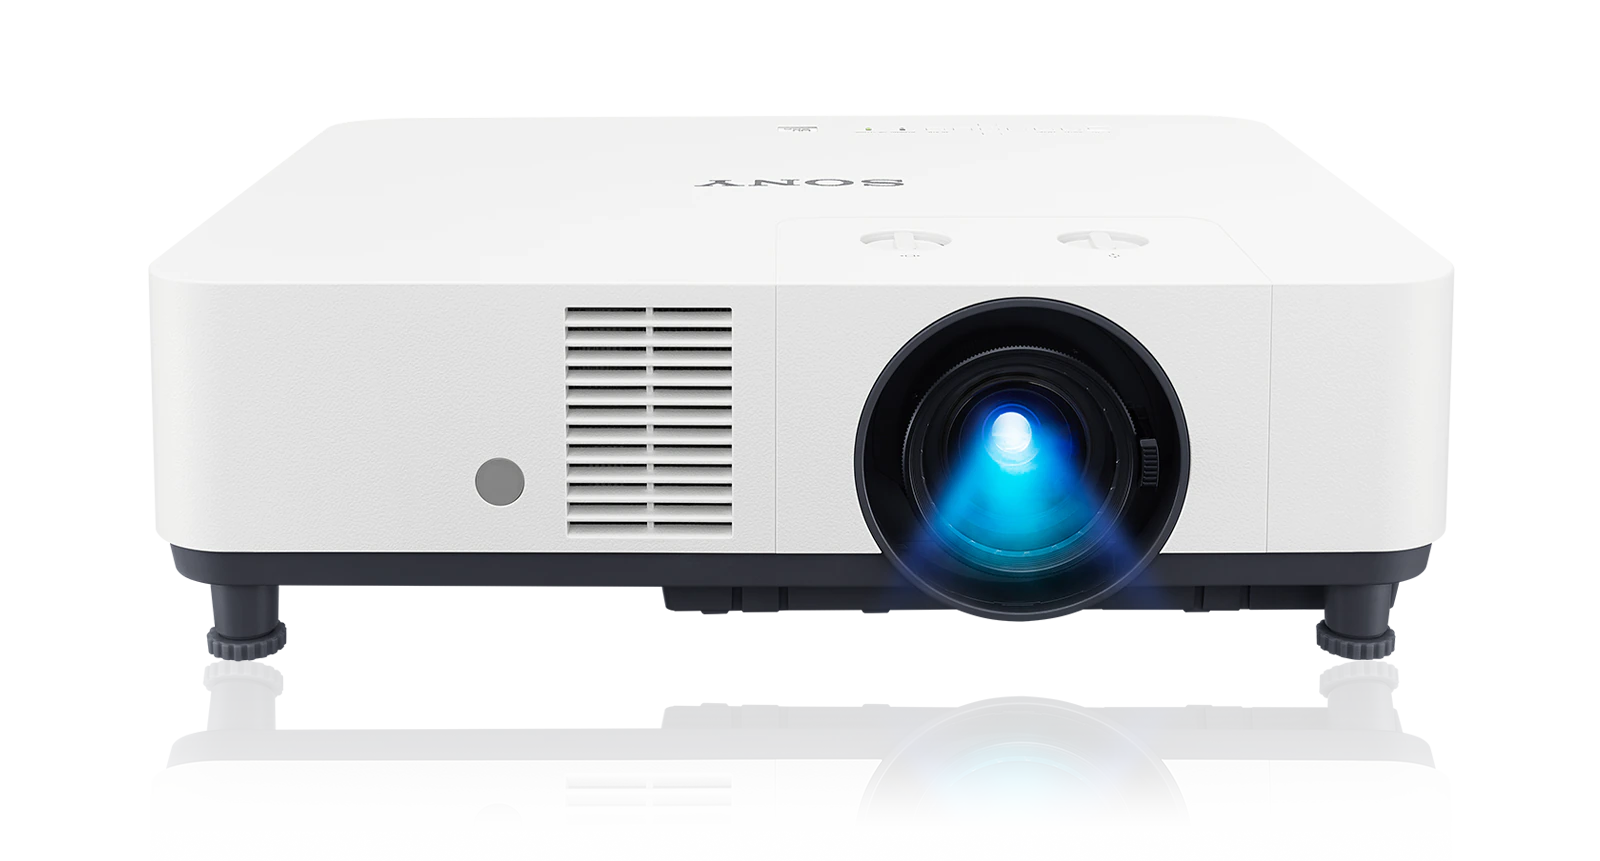 SONY VPL-PHZ50, PHZ60,PHZ51,PHZ61 Laser Projector lens Fixed and Zoom 0.53-0.7:1, 0.6:1, 0.7:1, 0.75-1.2:1, 0.95:1 Conference room, Classroom, Golf simulators